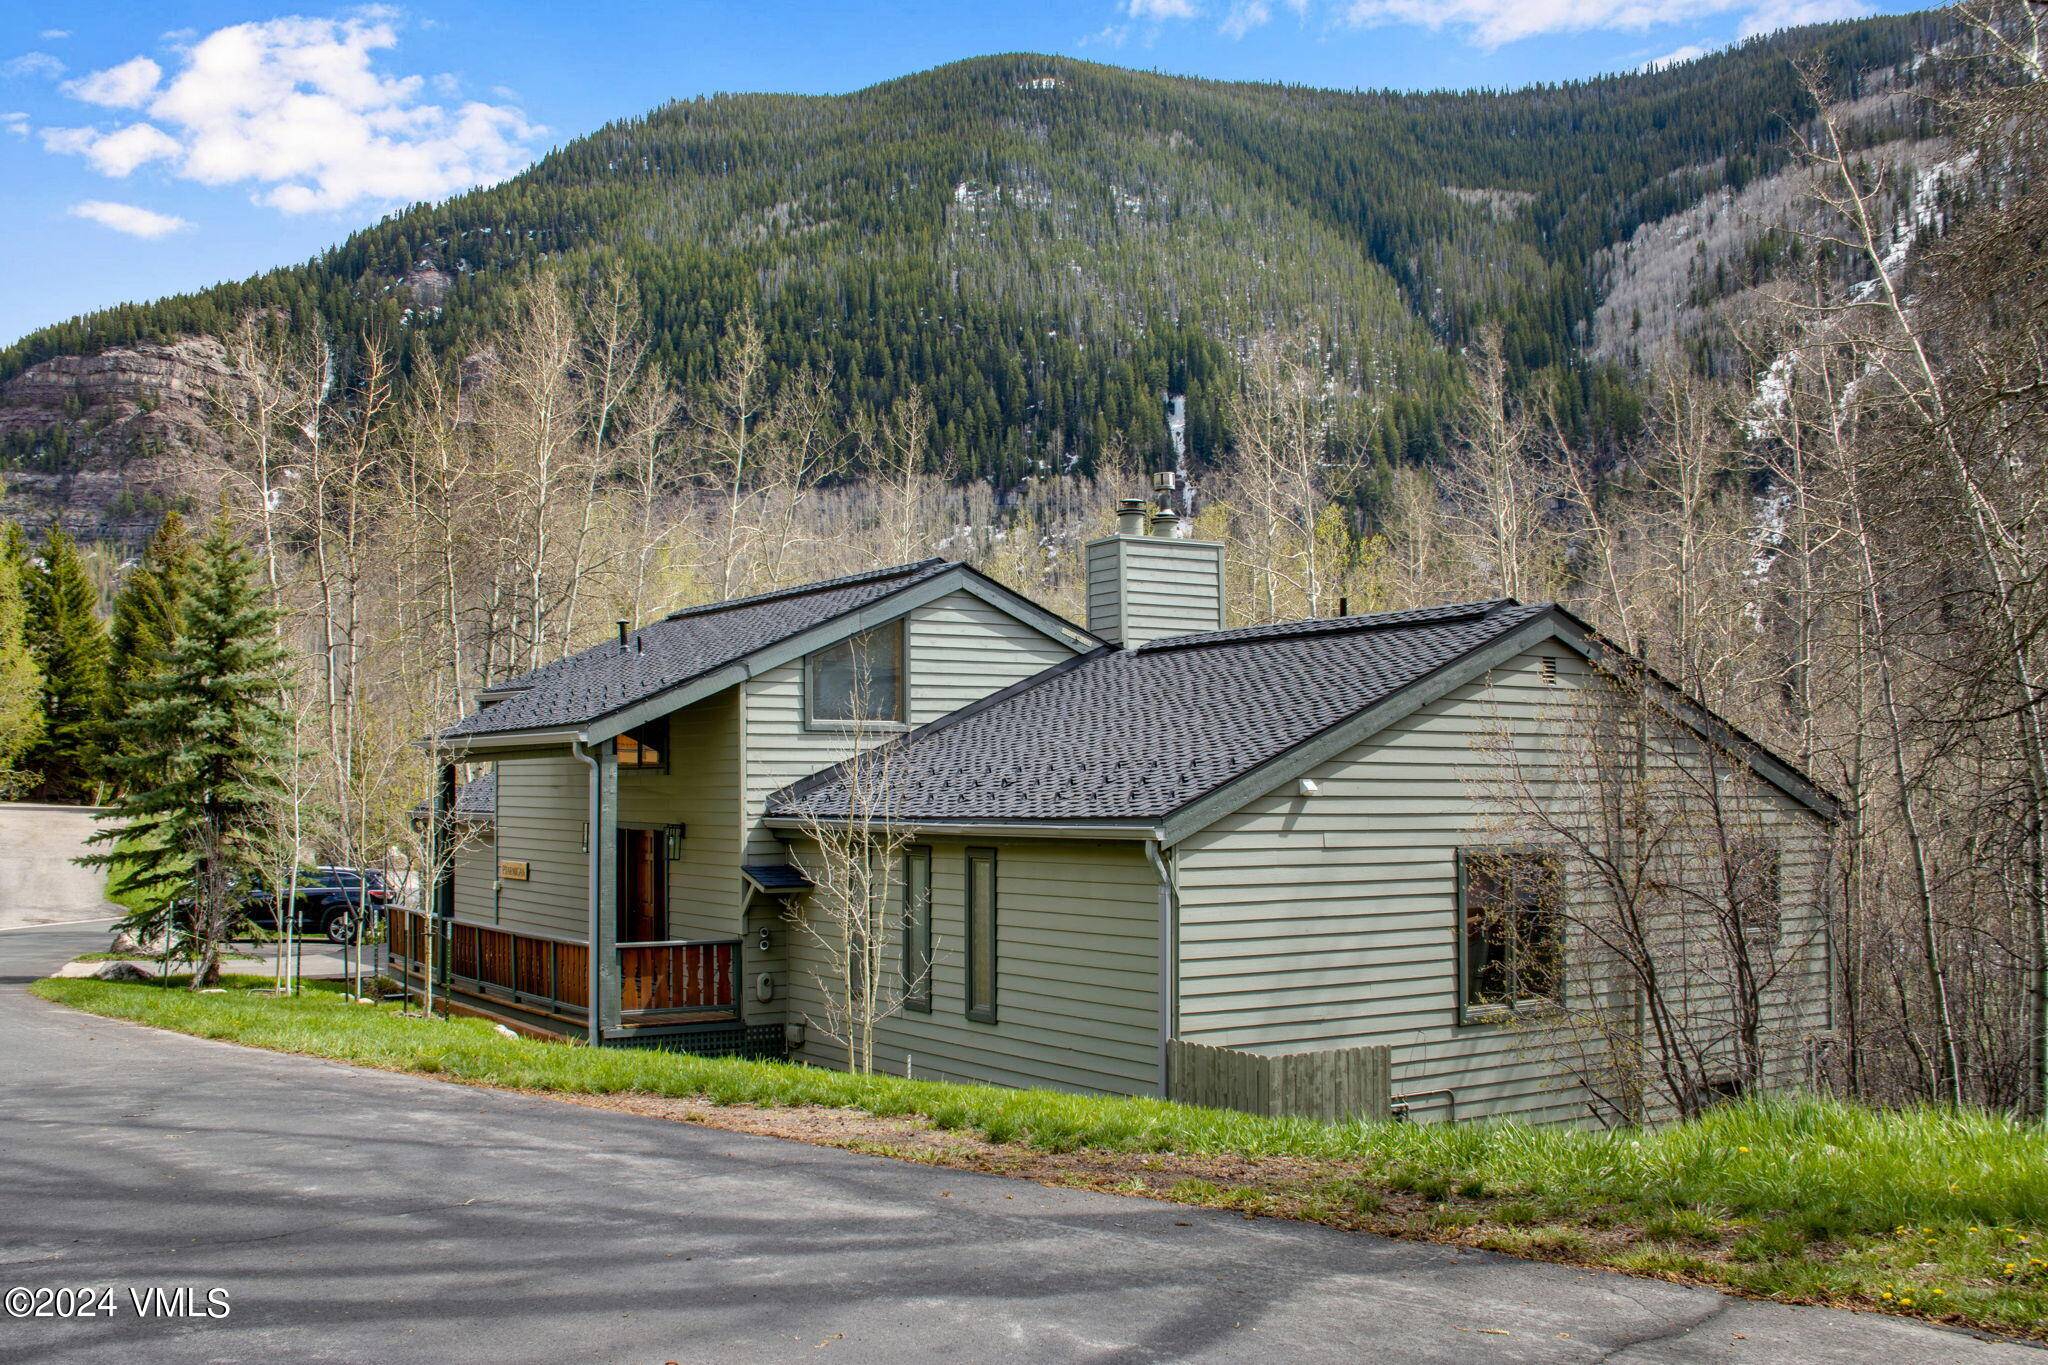 Only Single Family home listed in the Vail Mountain School Neighborhood !